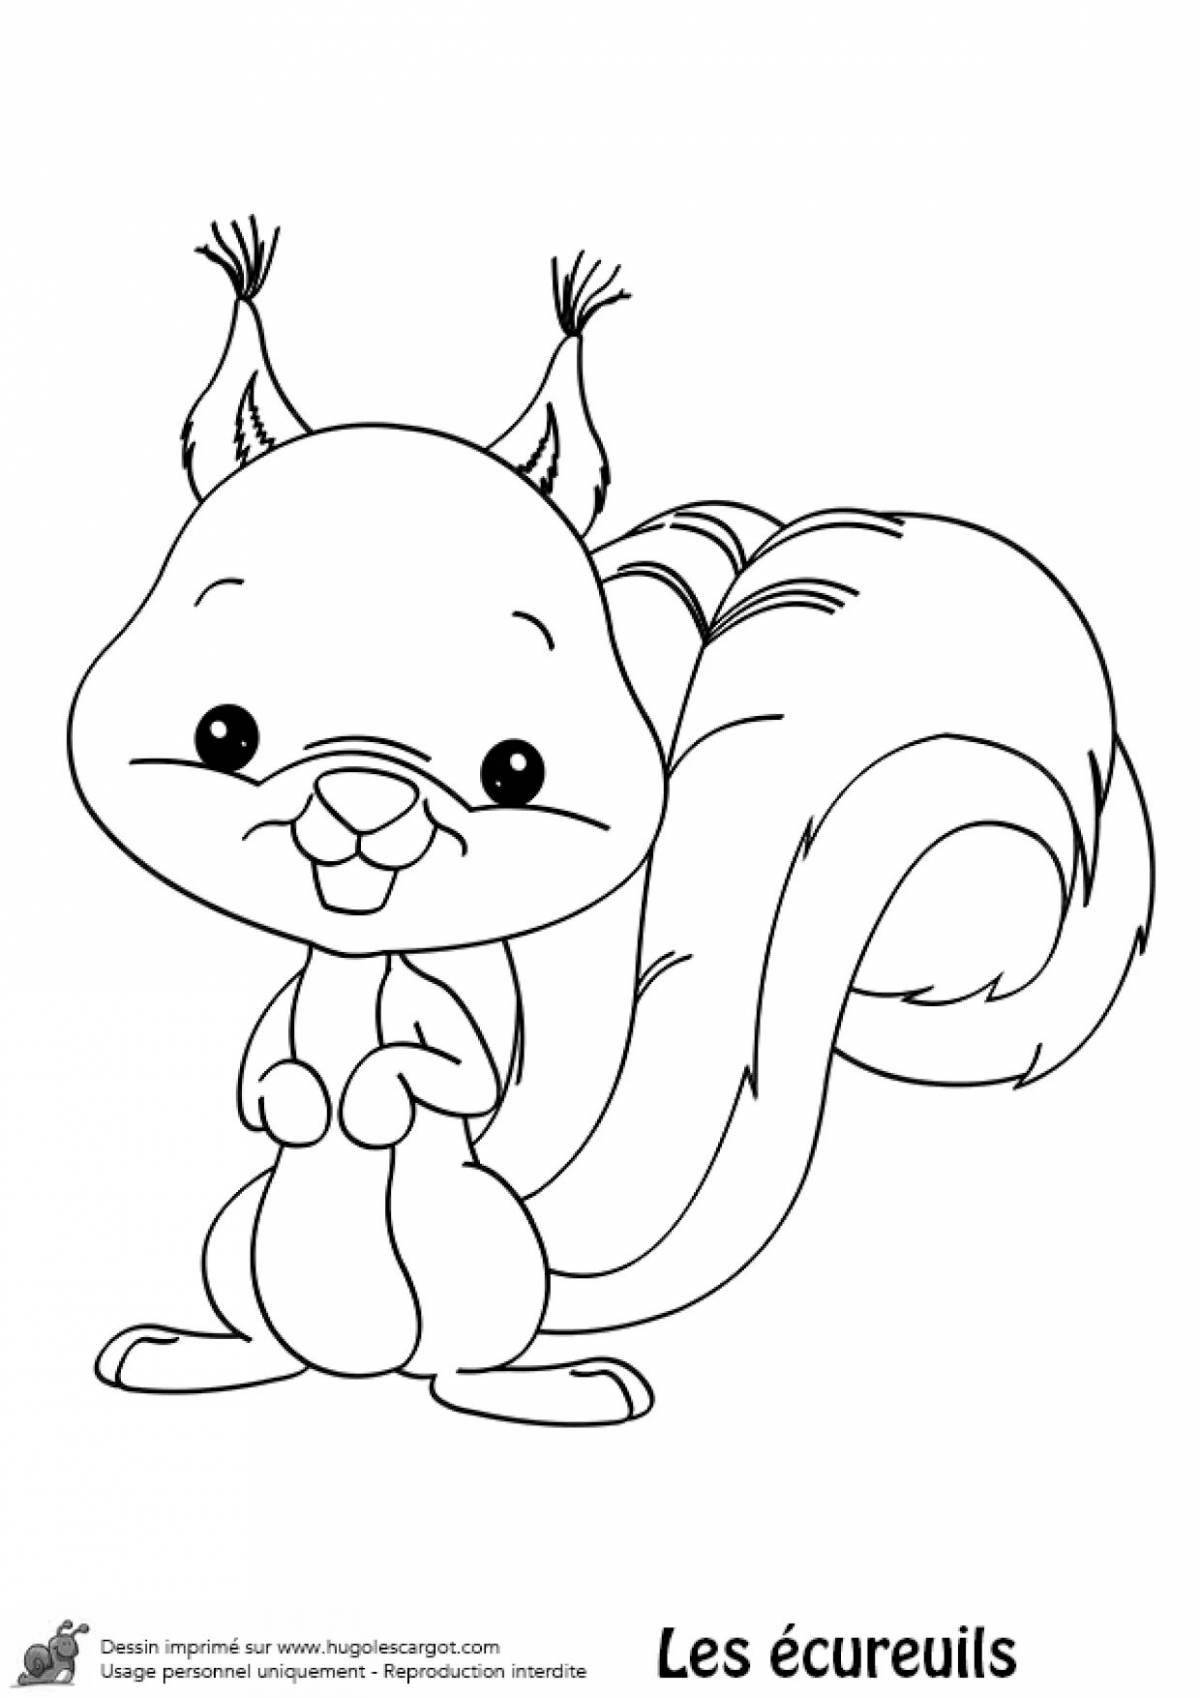 Fun coloring book squirrel for 4-5 year olds